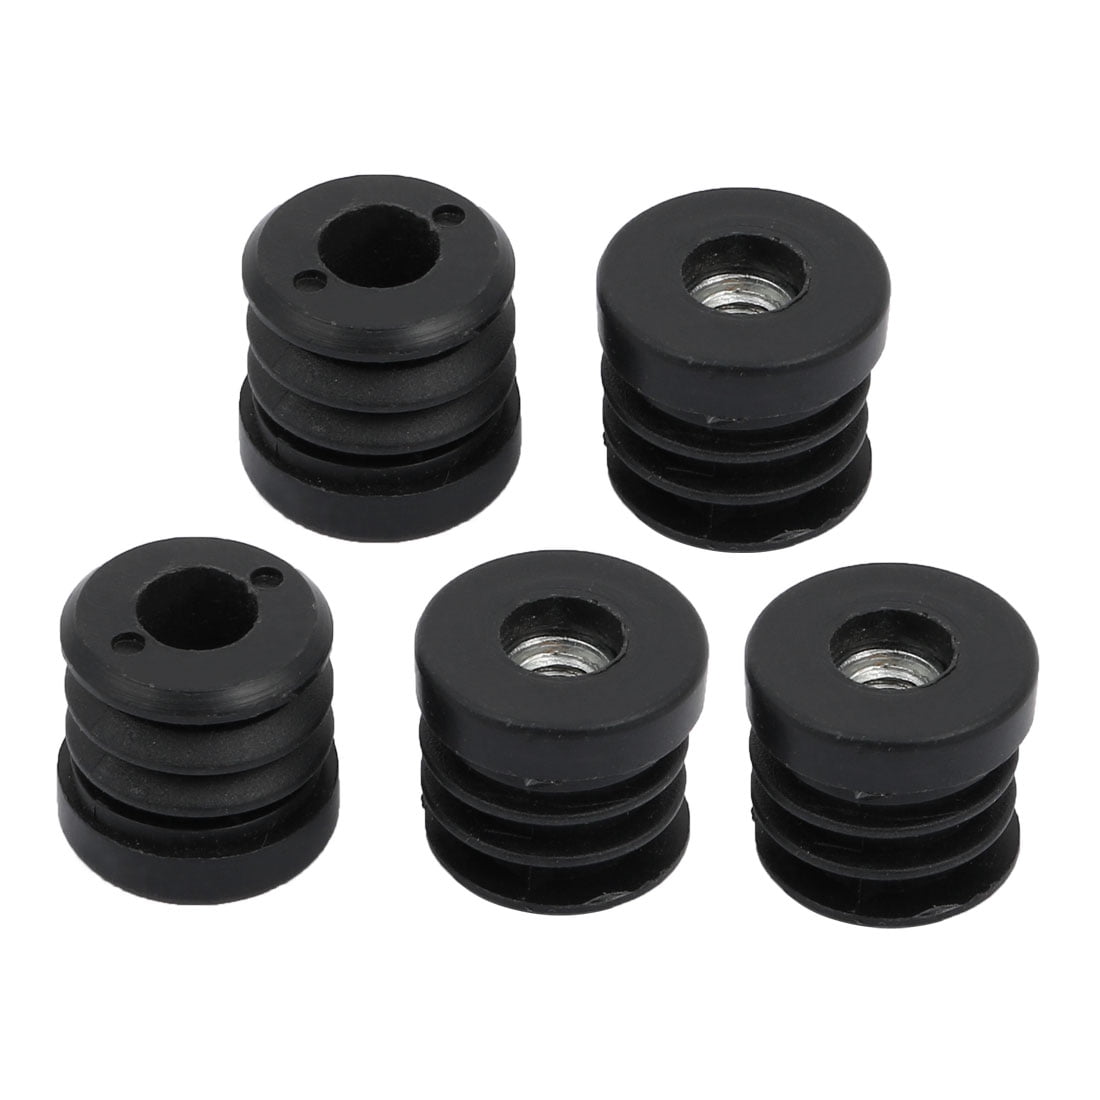 5 Pcs Black 25mm Dia Round Tubing Pipe Blanking End Caps Insert Covers 